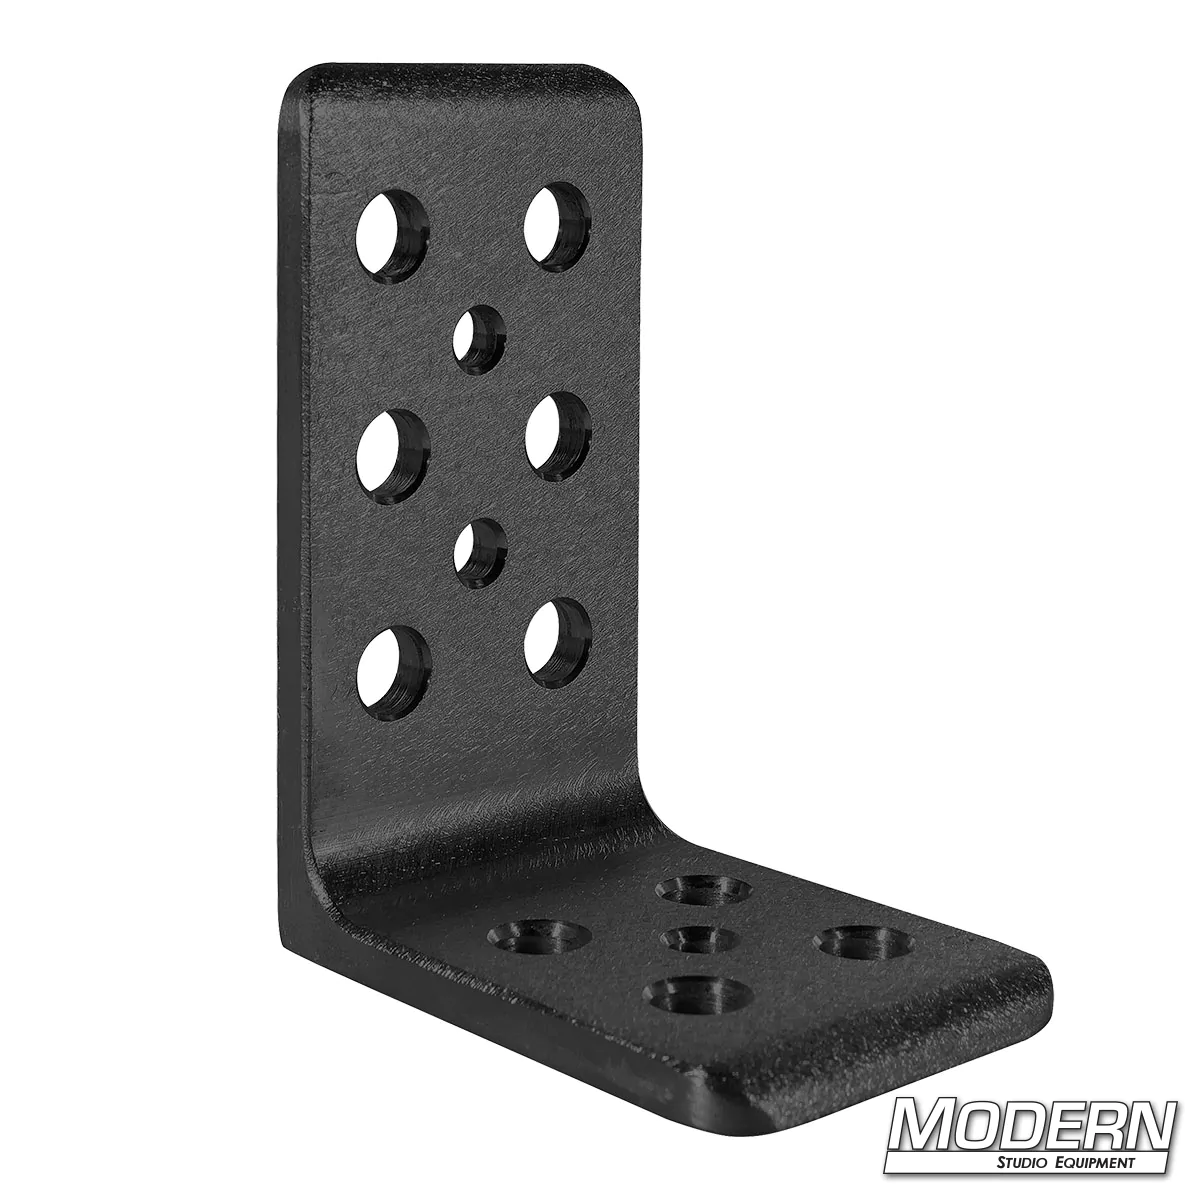 Cheese L-Plate 3-inch x 4-inch - Black Anodized